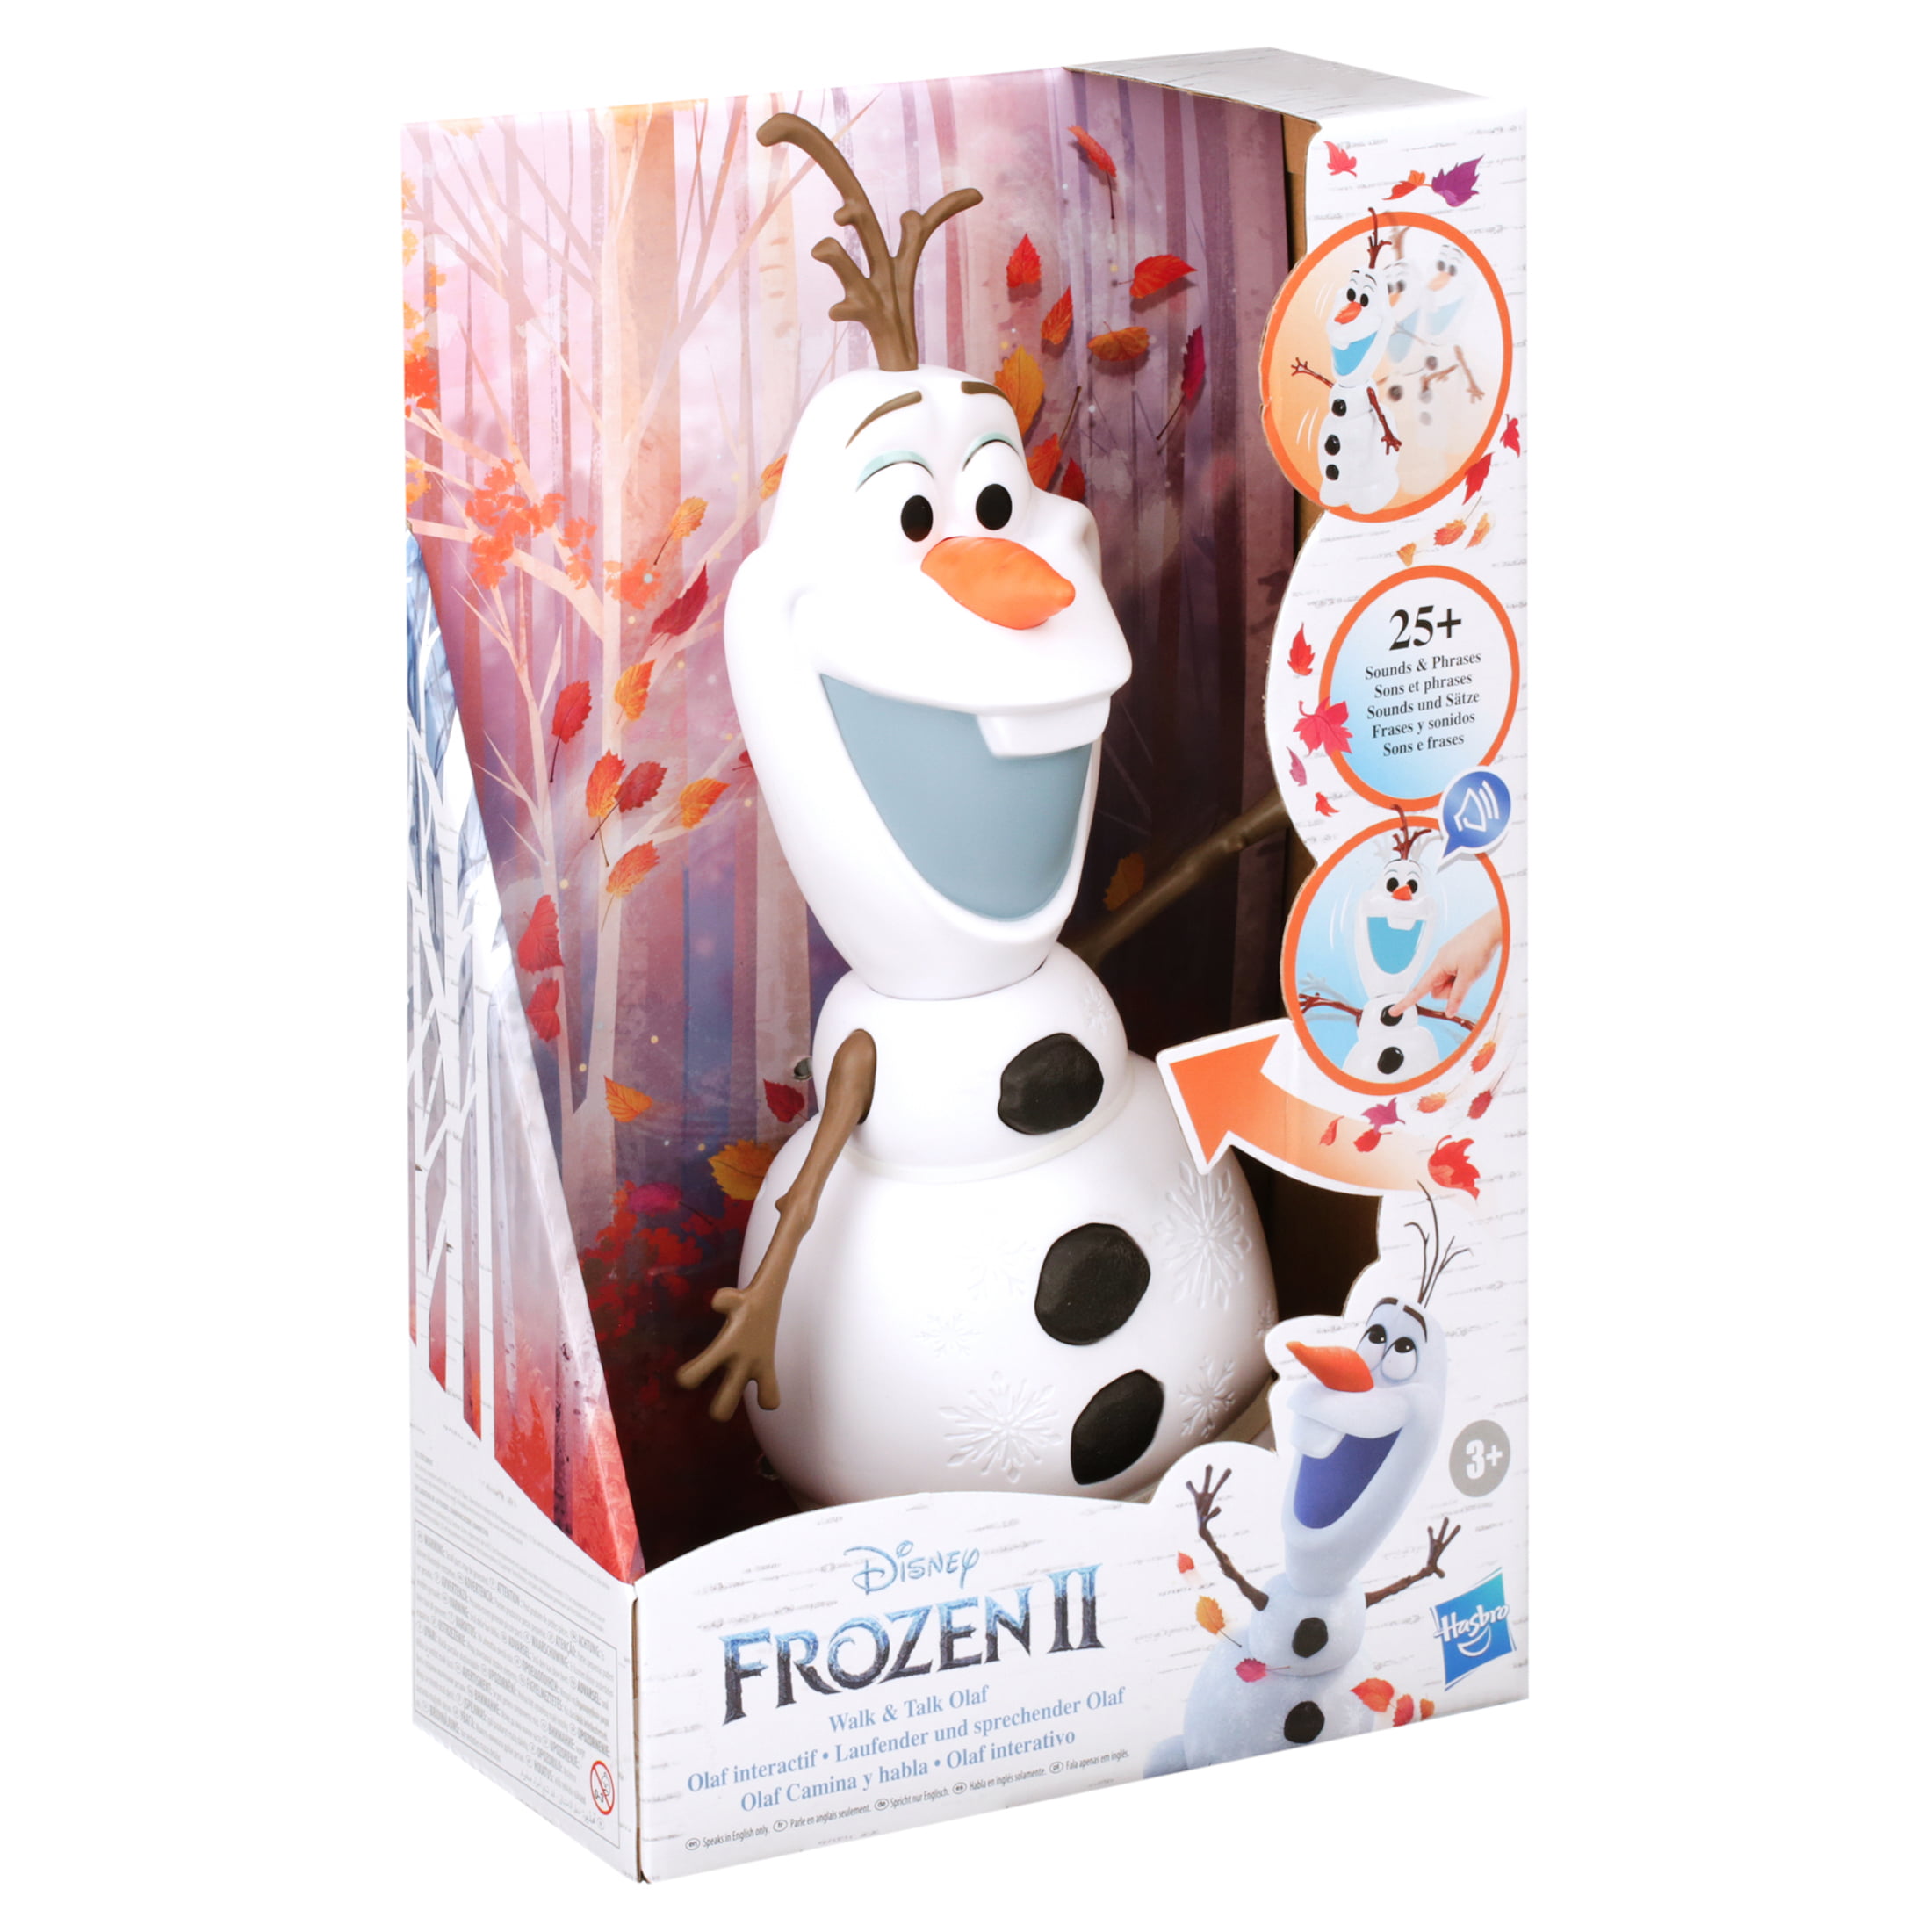 Disney Frozen 2 Walk And Talk Olaf Toy For Girls And Boys Ages 3 25 Sounds Walmart Com Walmart Com Levi came in the long line of proud alphas of the ackerman who have served the royal line for generations and he was tasked to serve his royal. disney frozen 2 walk and talk olaf toy for girls and boys ages 3 25 sounds